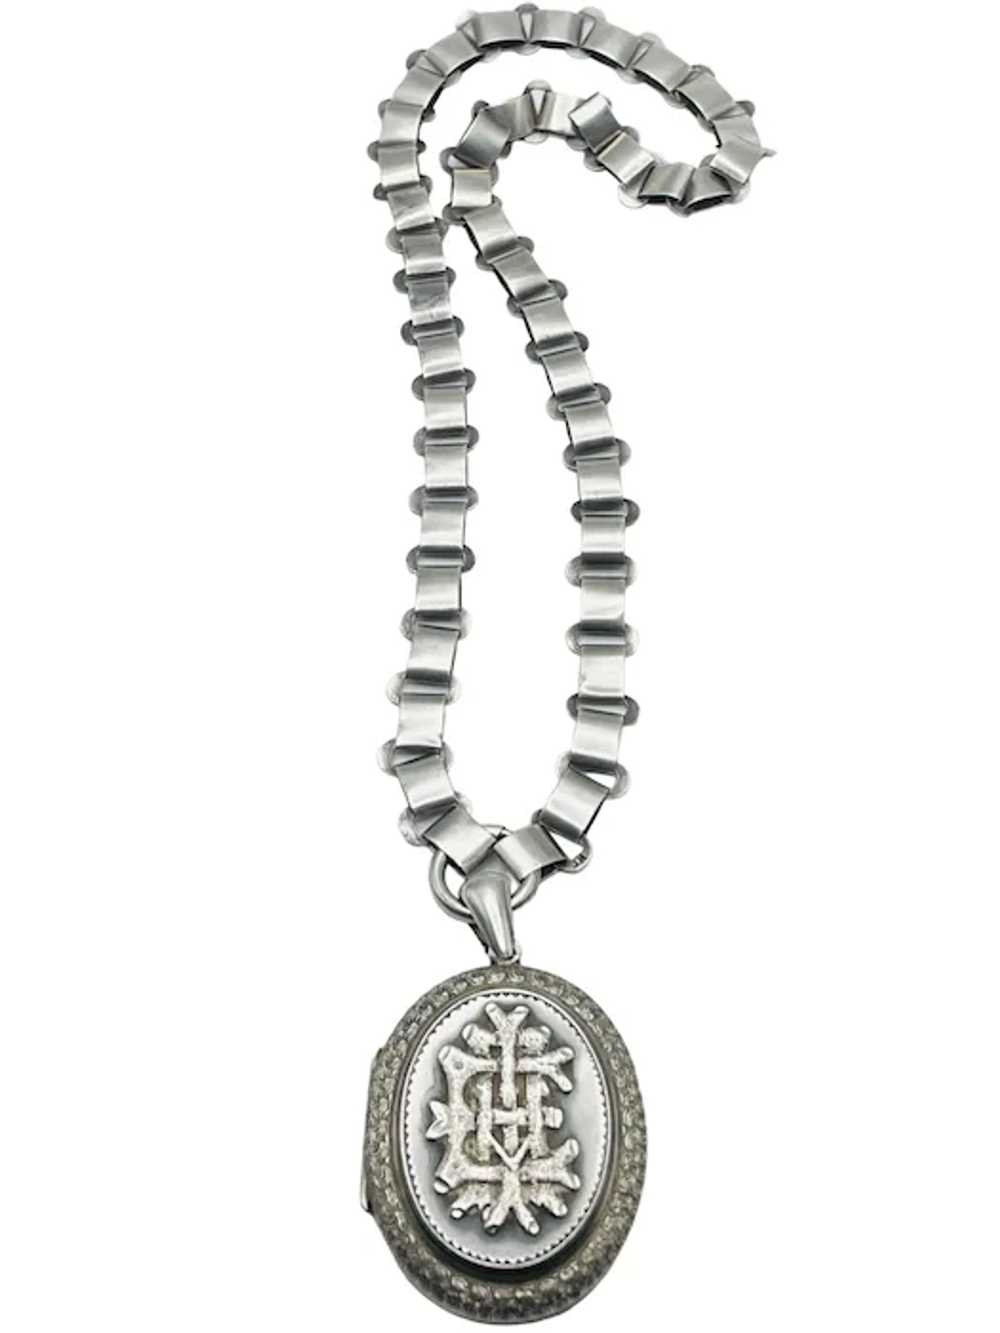 Antique Sterling Silver Locket Book Chain Necklace - image 2